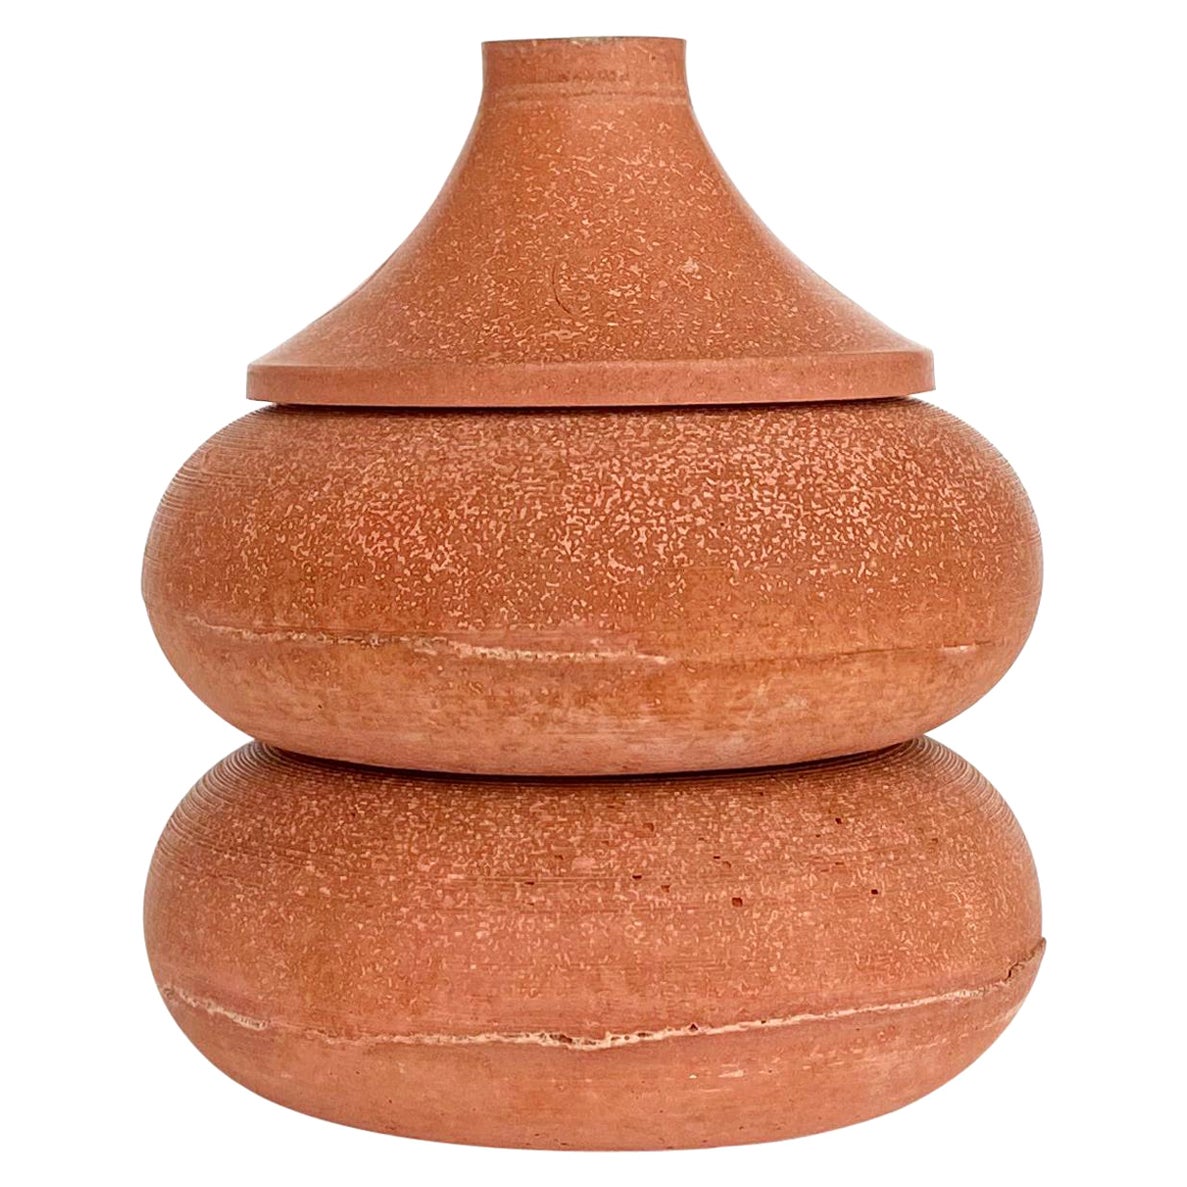 Nomad Jar Pebble Tower by Gilles & Cecilie For Sale